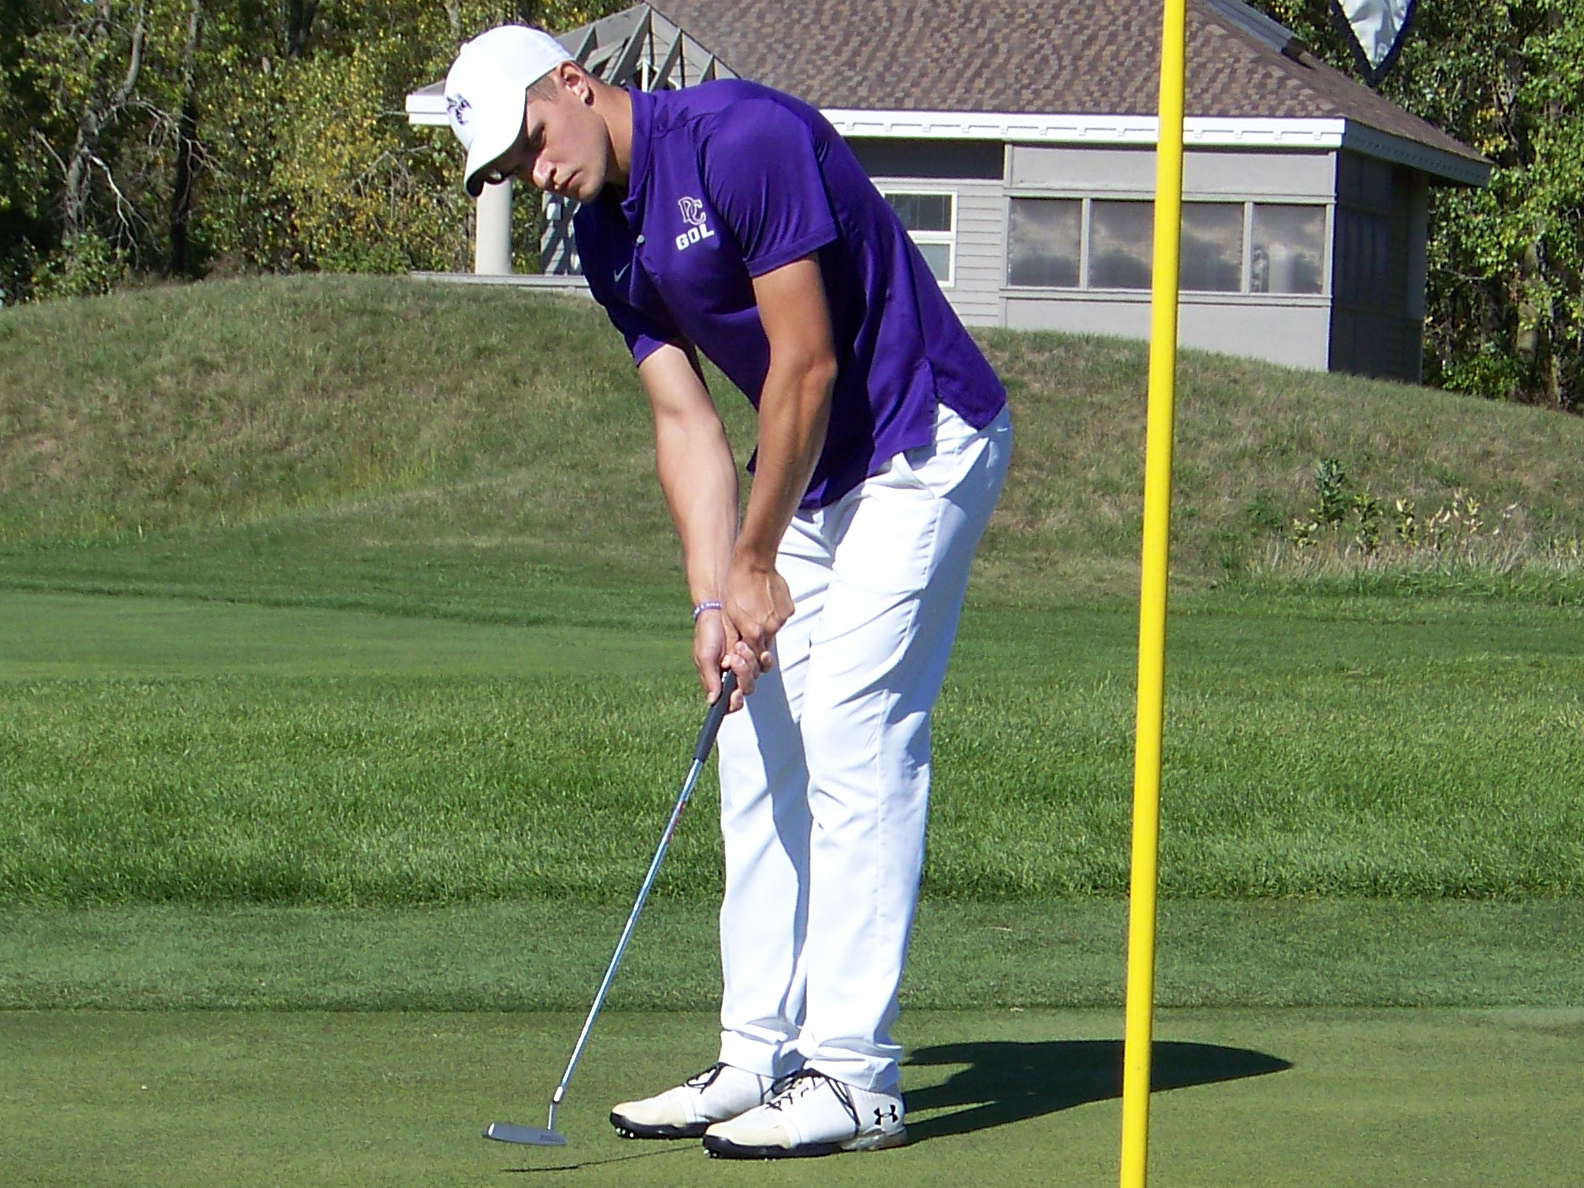 Clingaman’s 2-under 70 leads men’s golf on final day of HCAC Preview